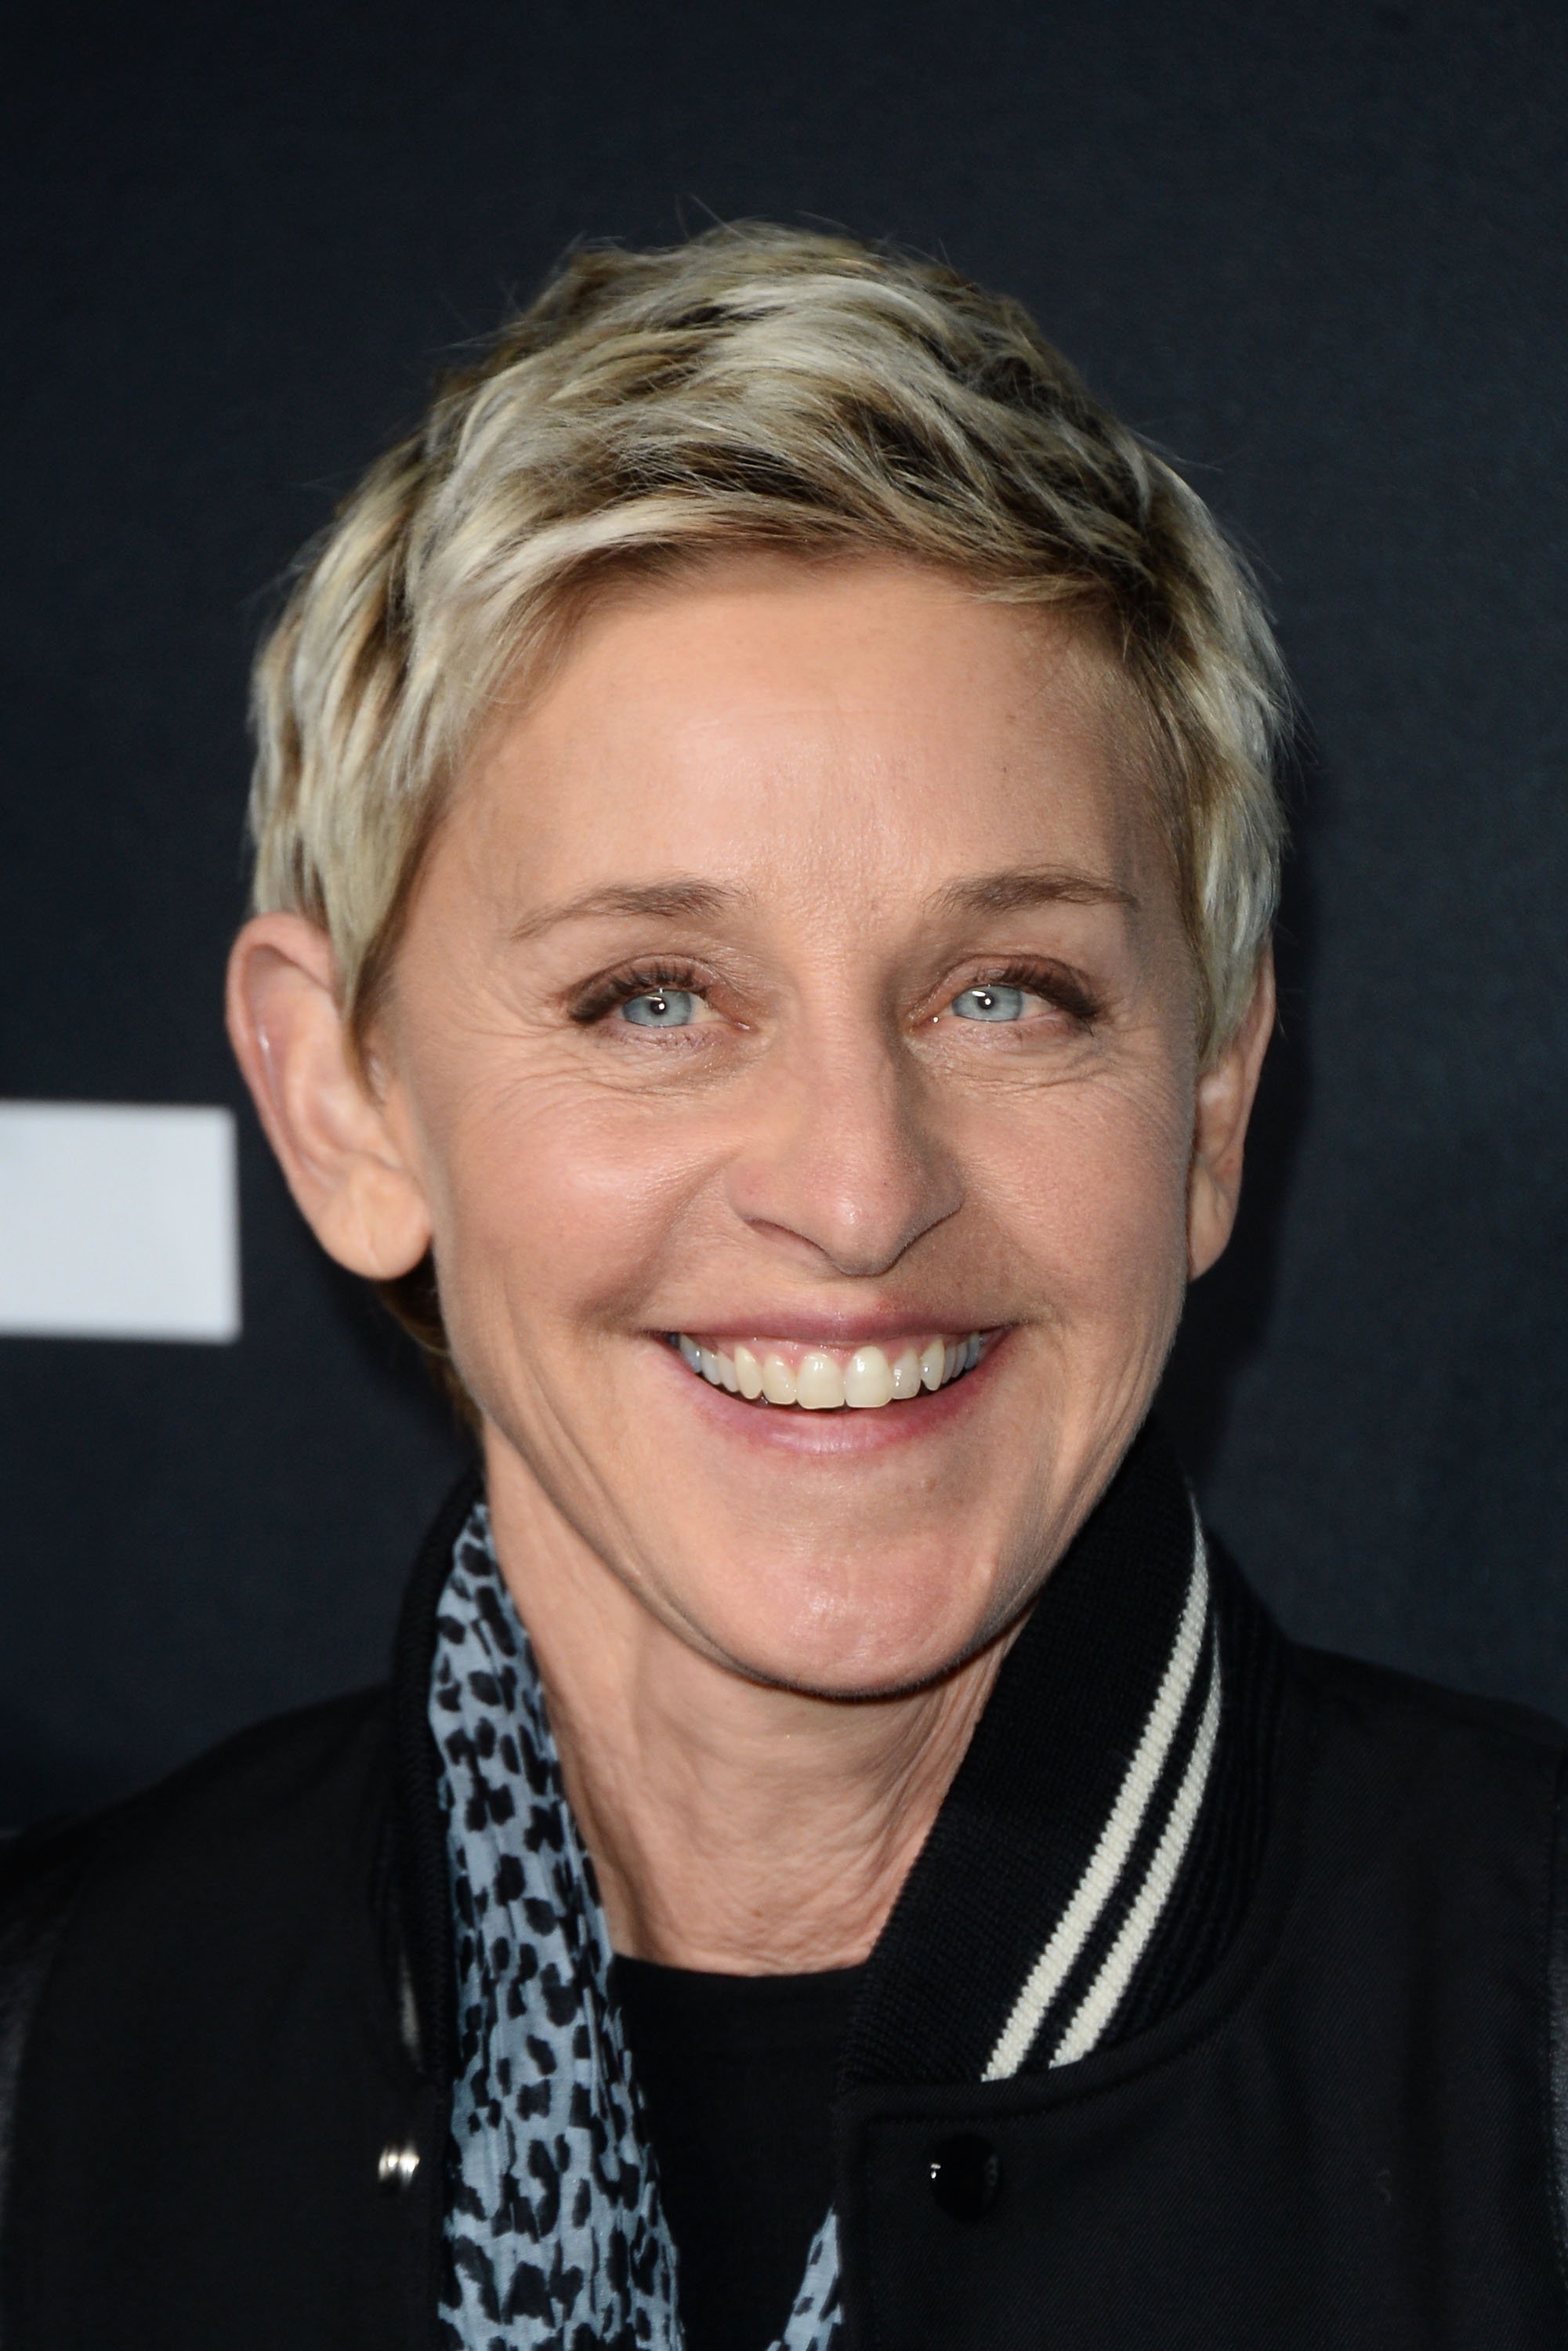 Ellen DeGeneres arrives at the Saint Laurent show at the Hollywood Palladium on February 10, 2016 in Los Angeles, California | Photo: Getty Images